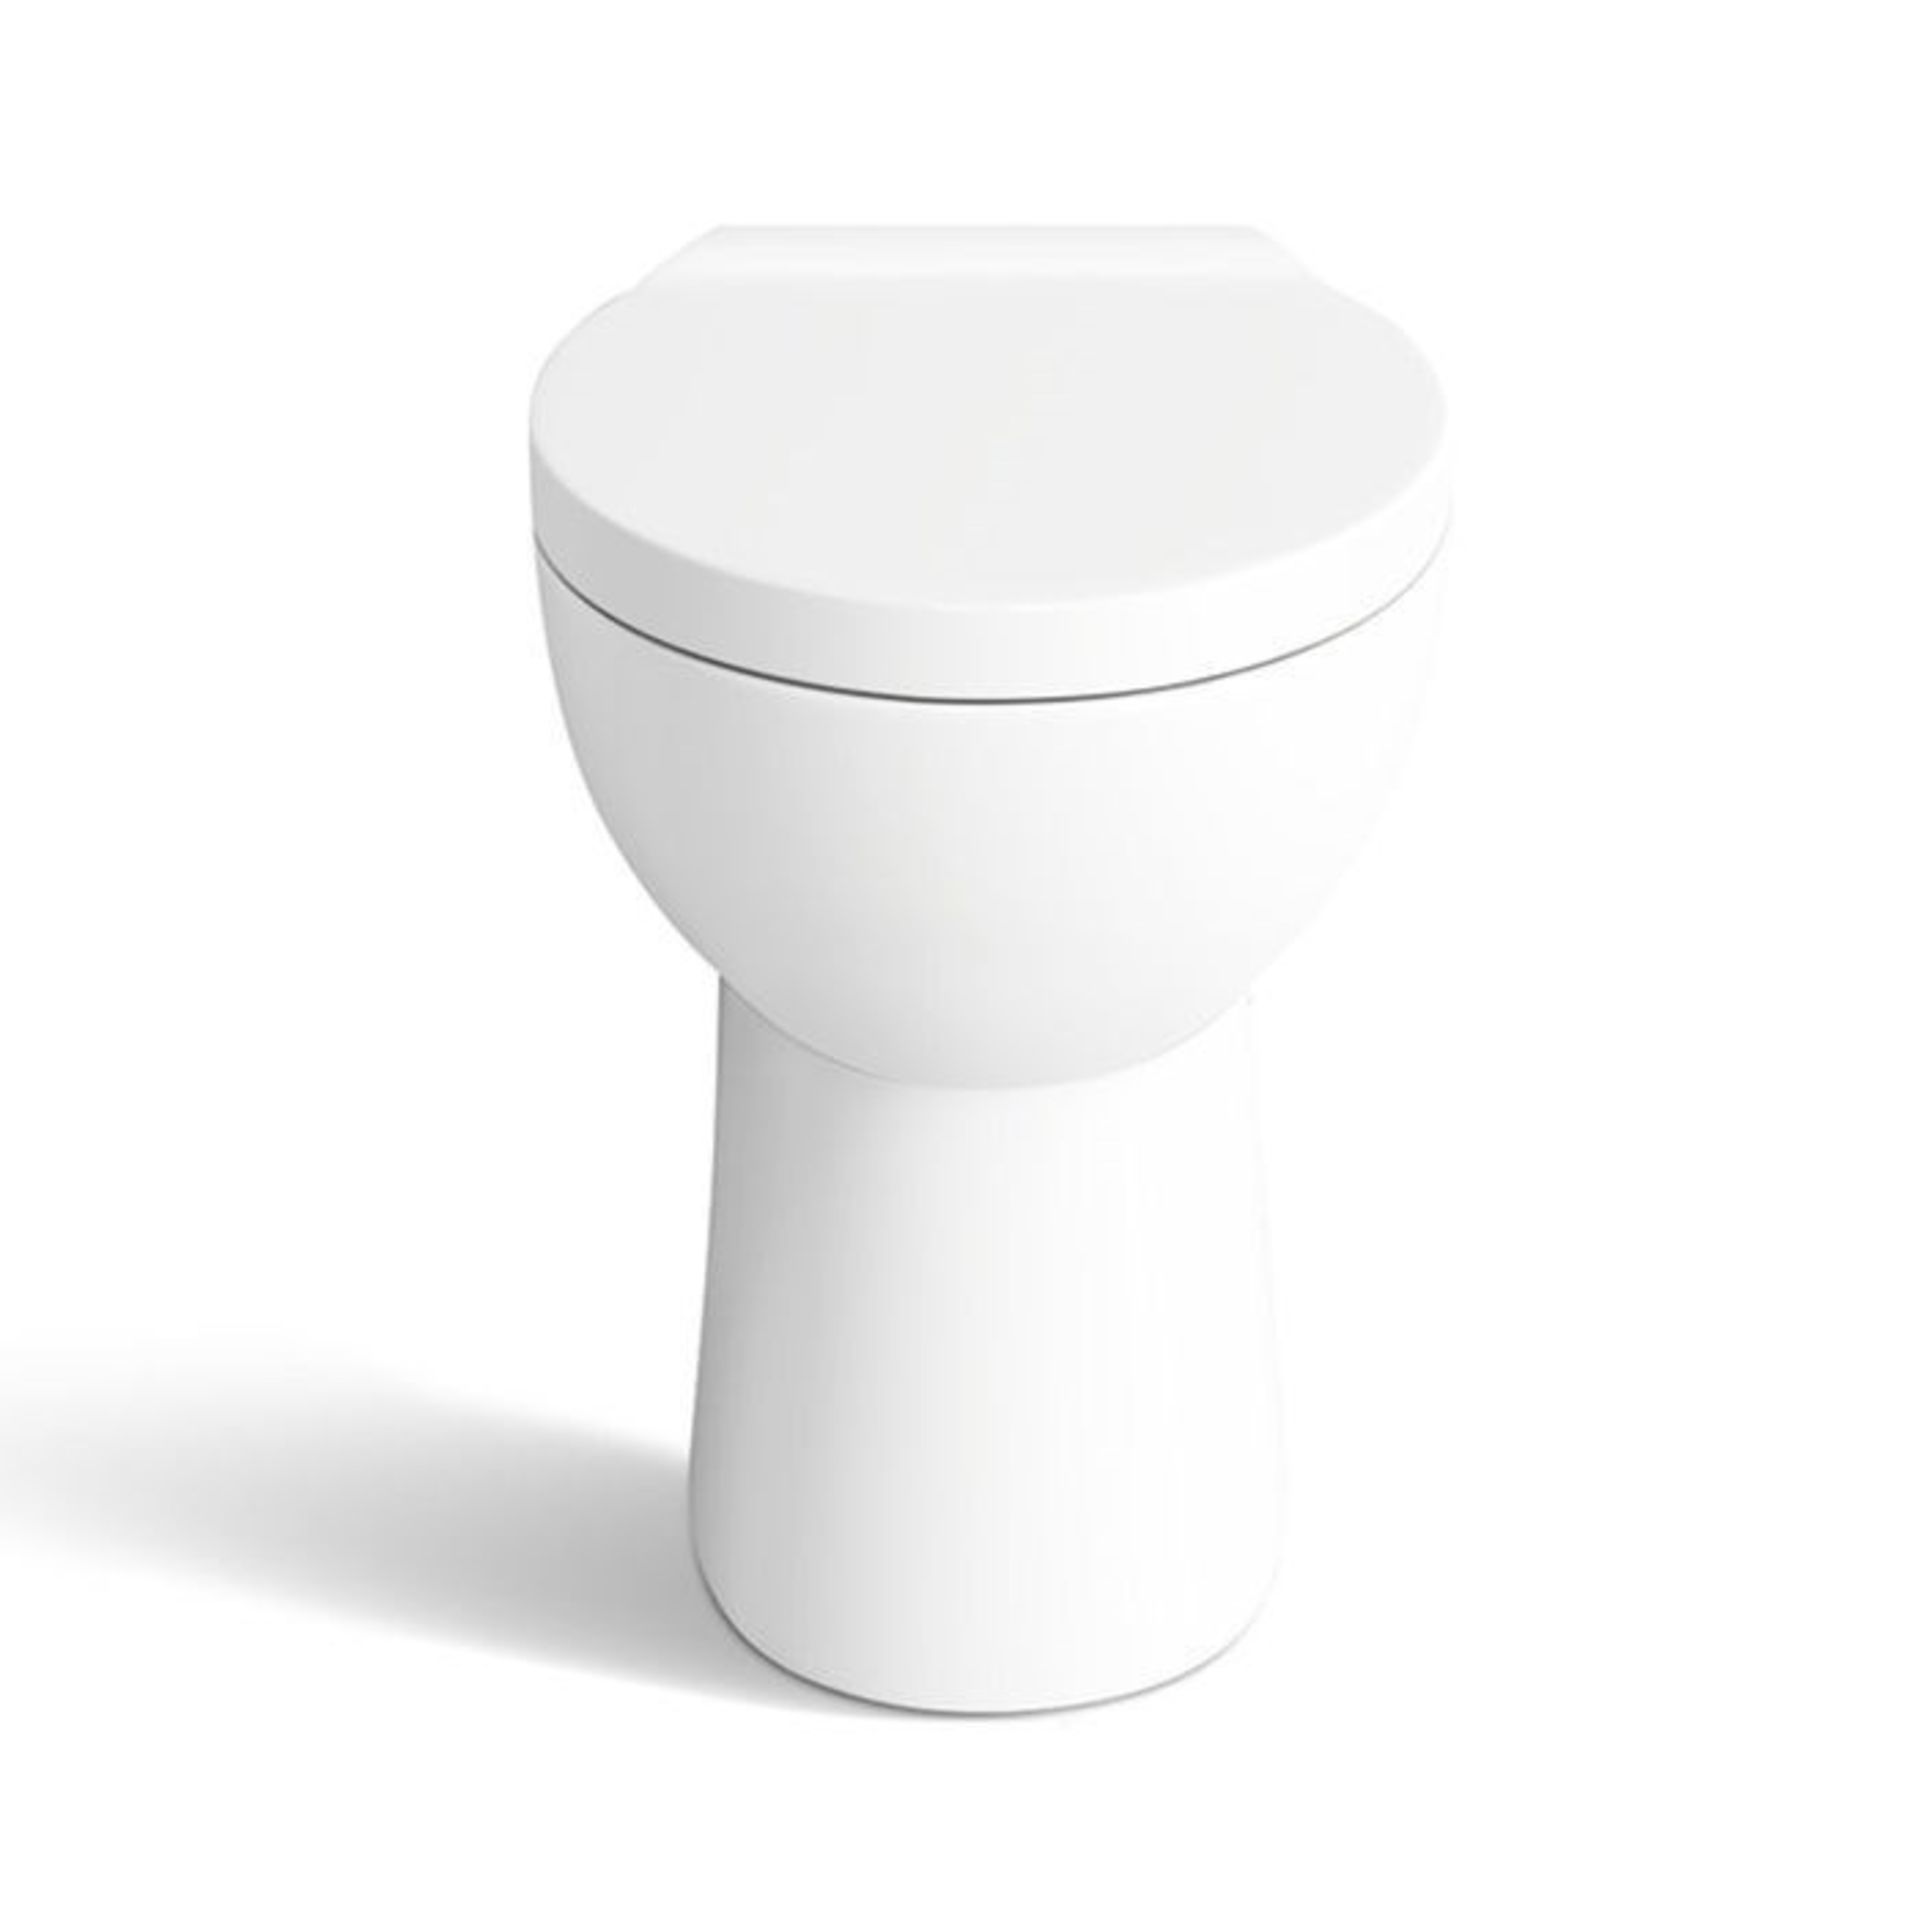 Quartz Back to Wall Toilet.Stylish design Made from White Vitreous China Finished in a high glo... - Image 3 of 3